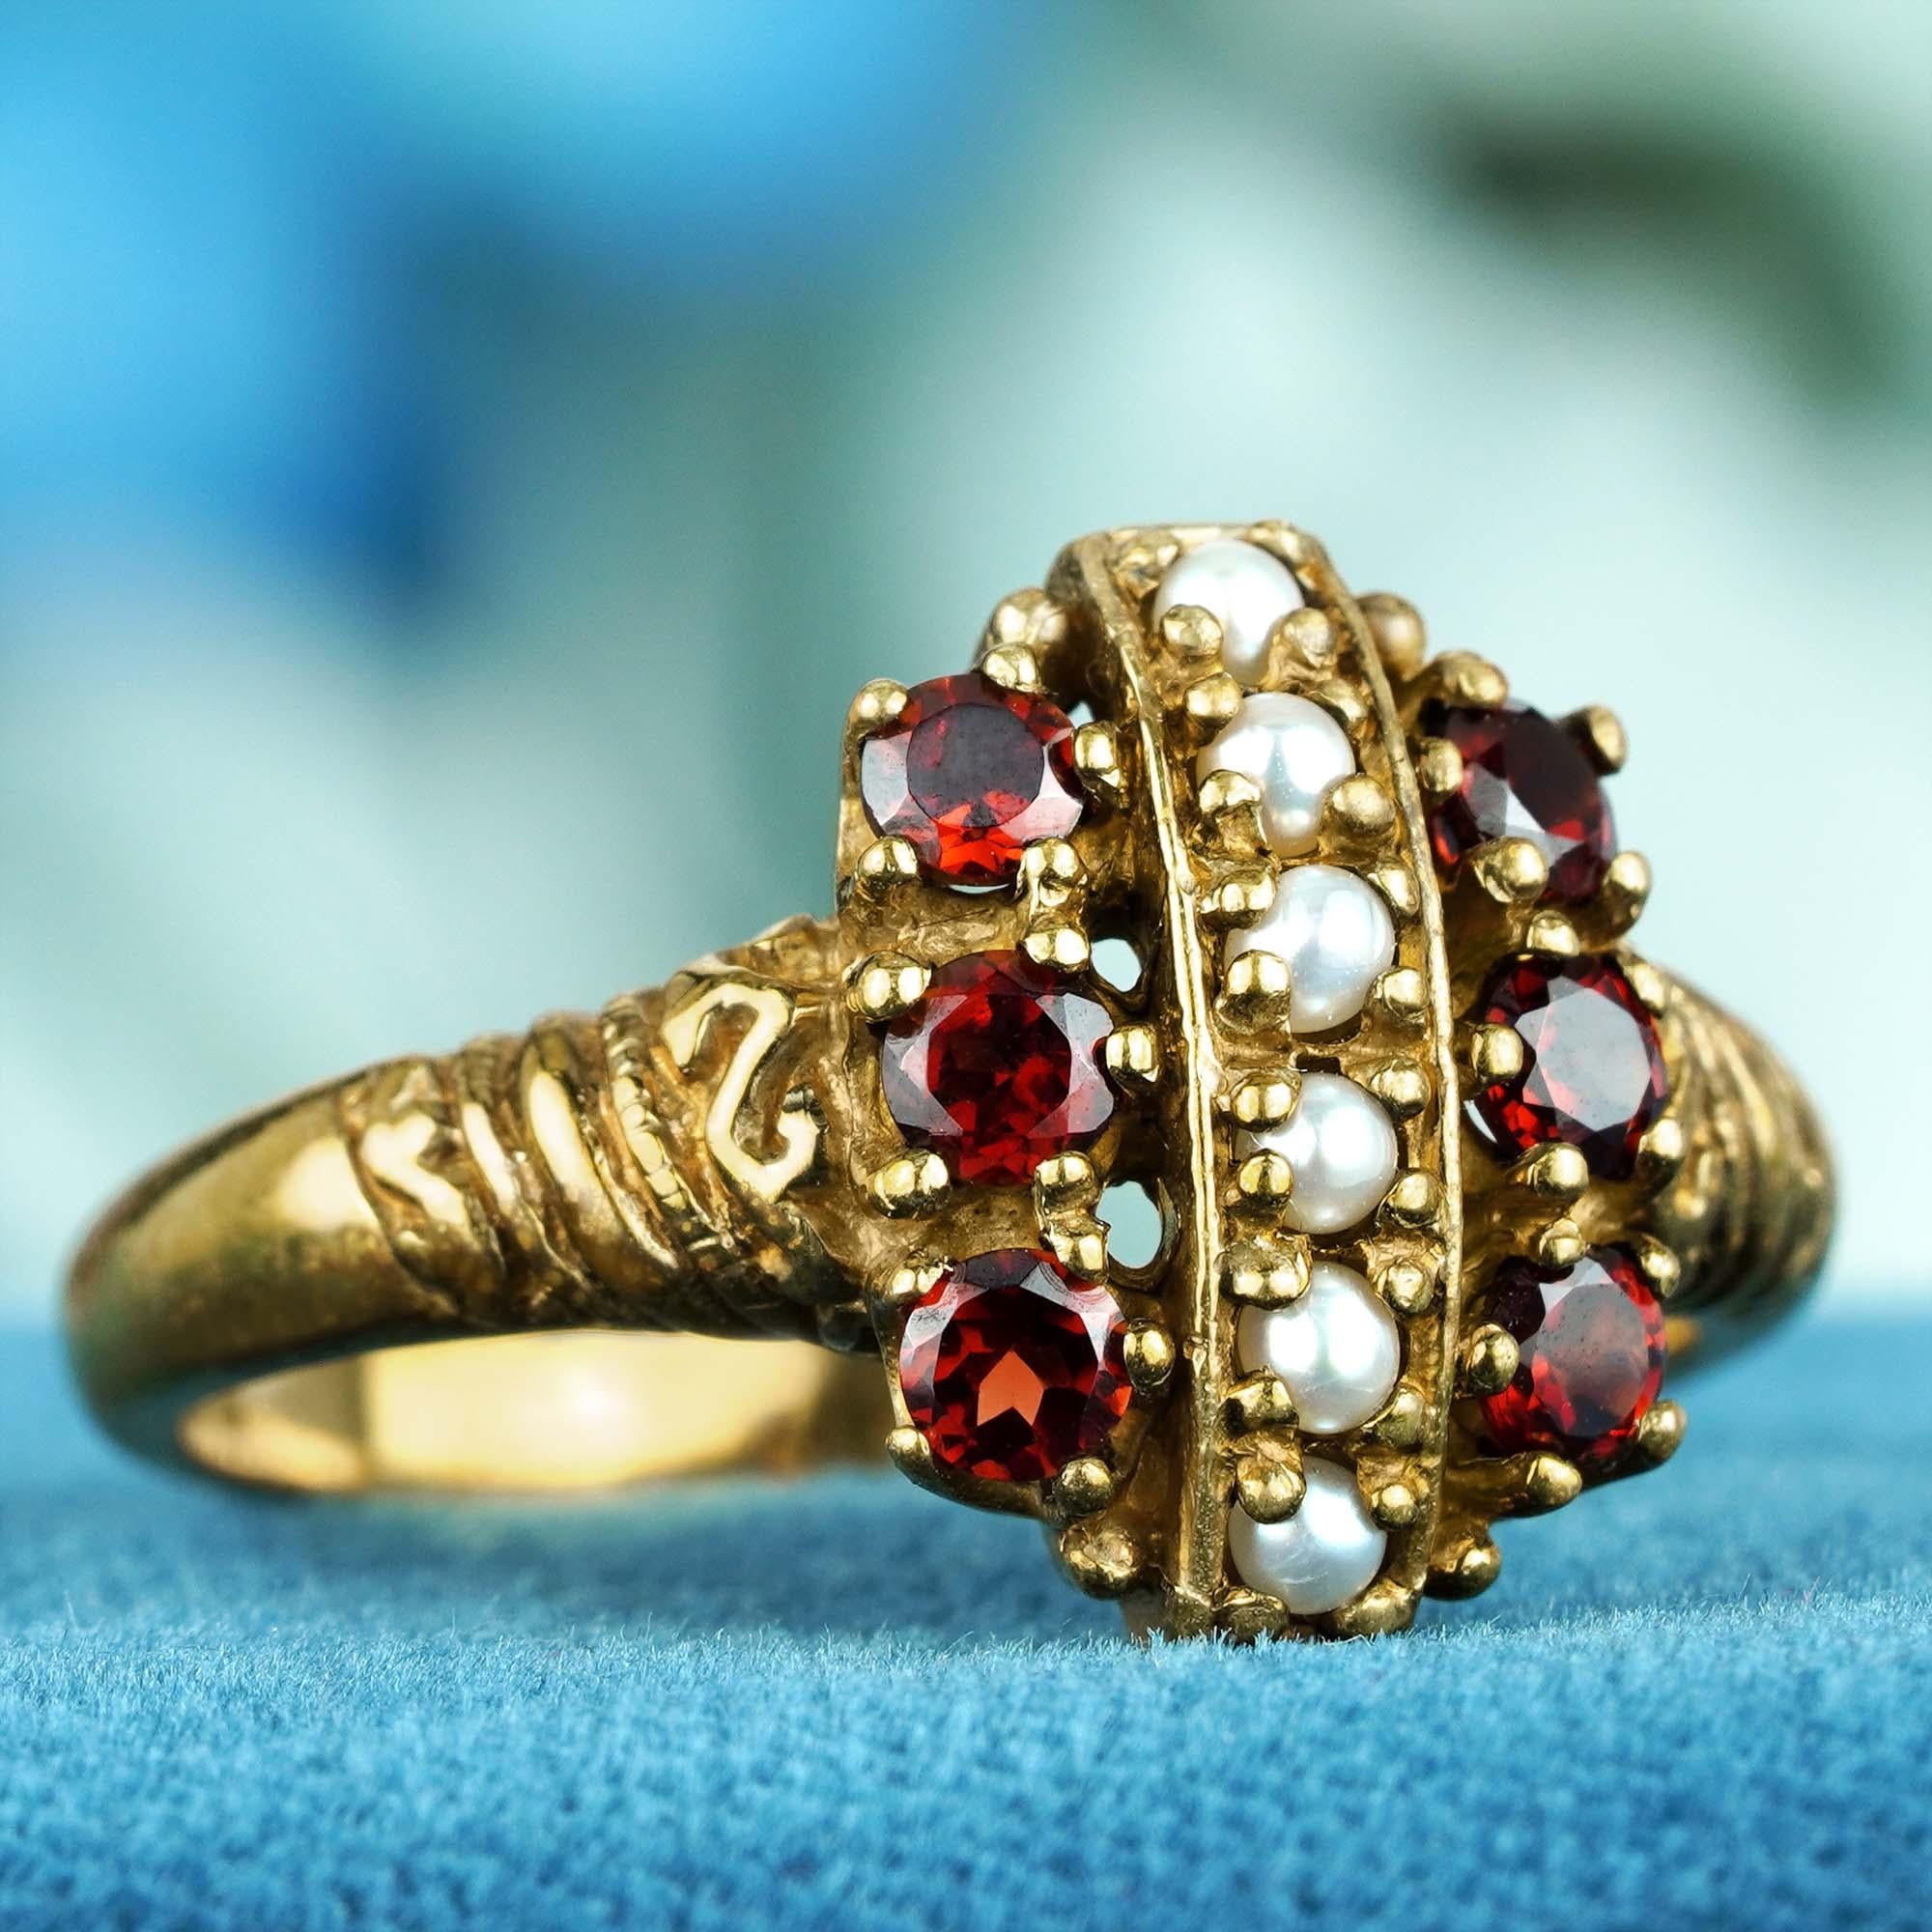 For Sale:  Natural Garnet and Pearl Vintage Style Cluster Ring in Solid 9K Gold 3